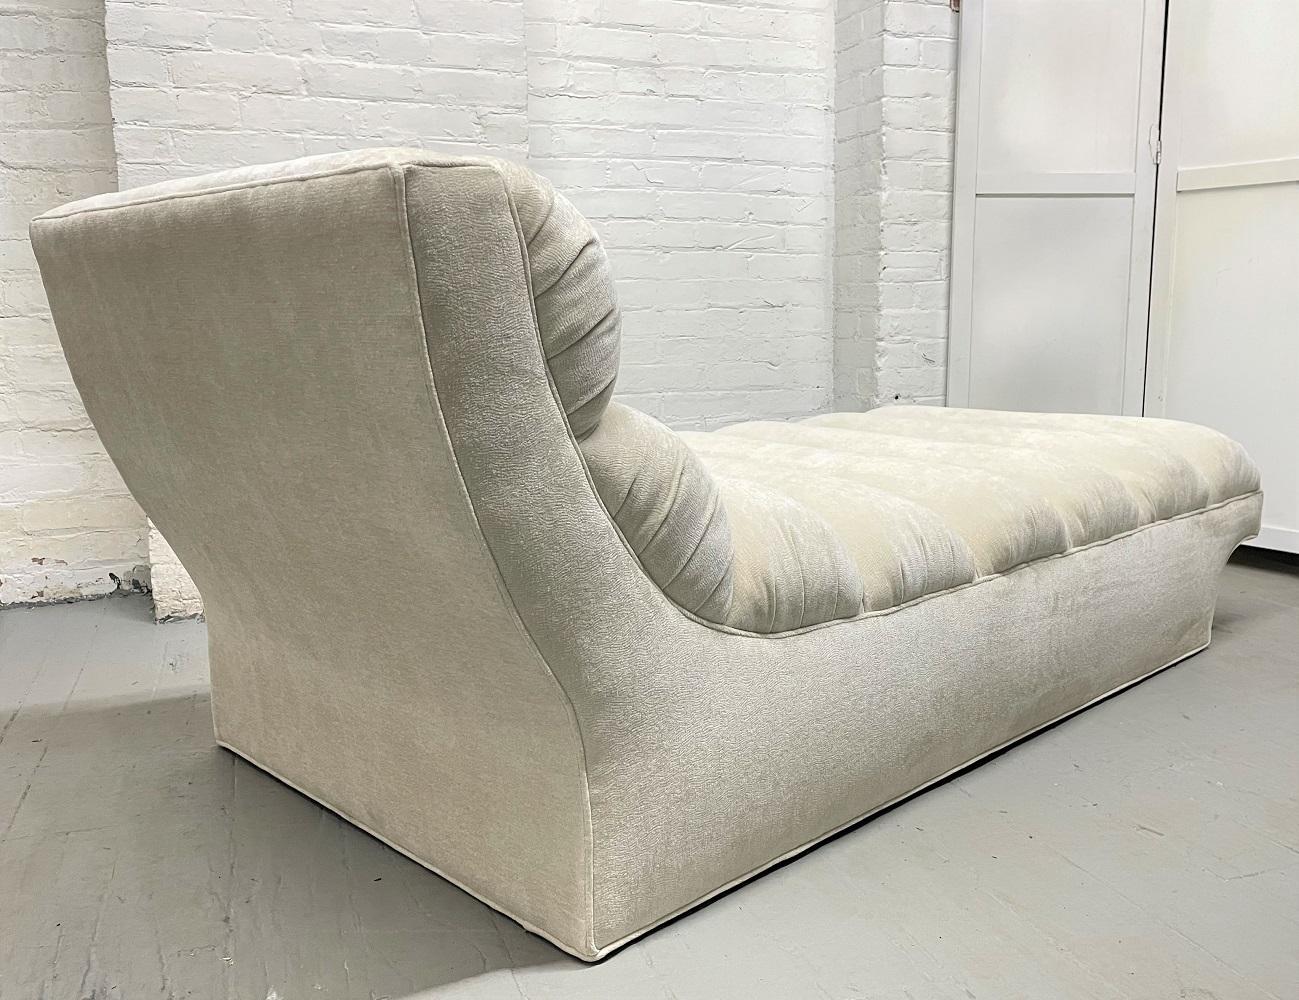 Upholstered Channel Pattern Daybed by Preview In Good Condition For Sale In New York, NY